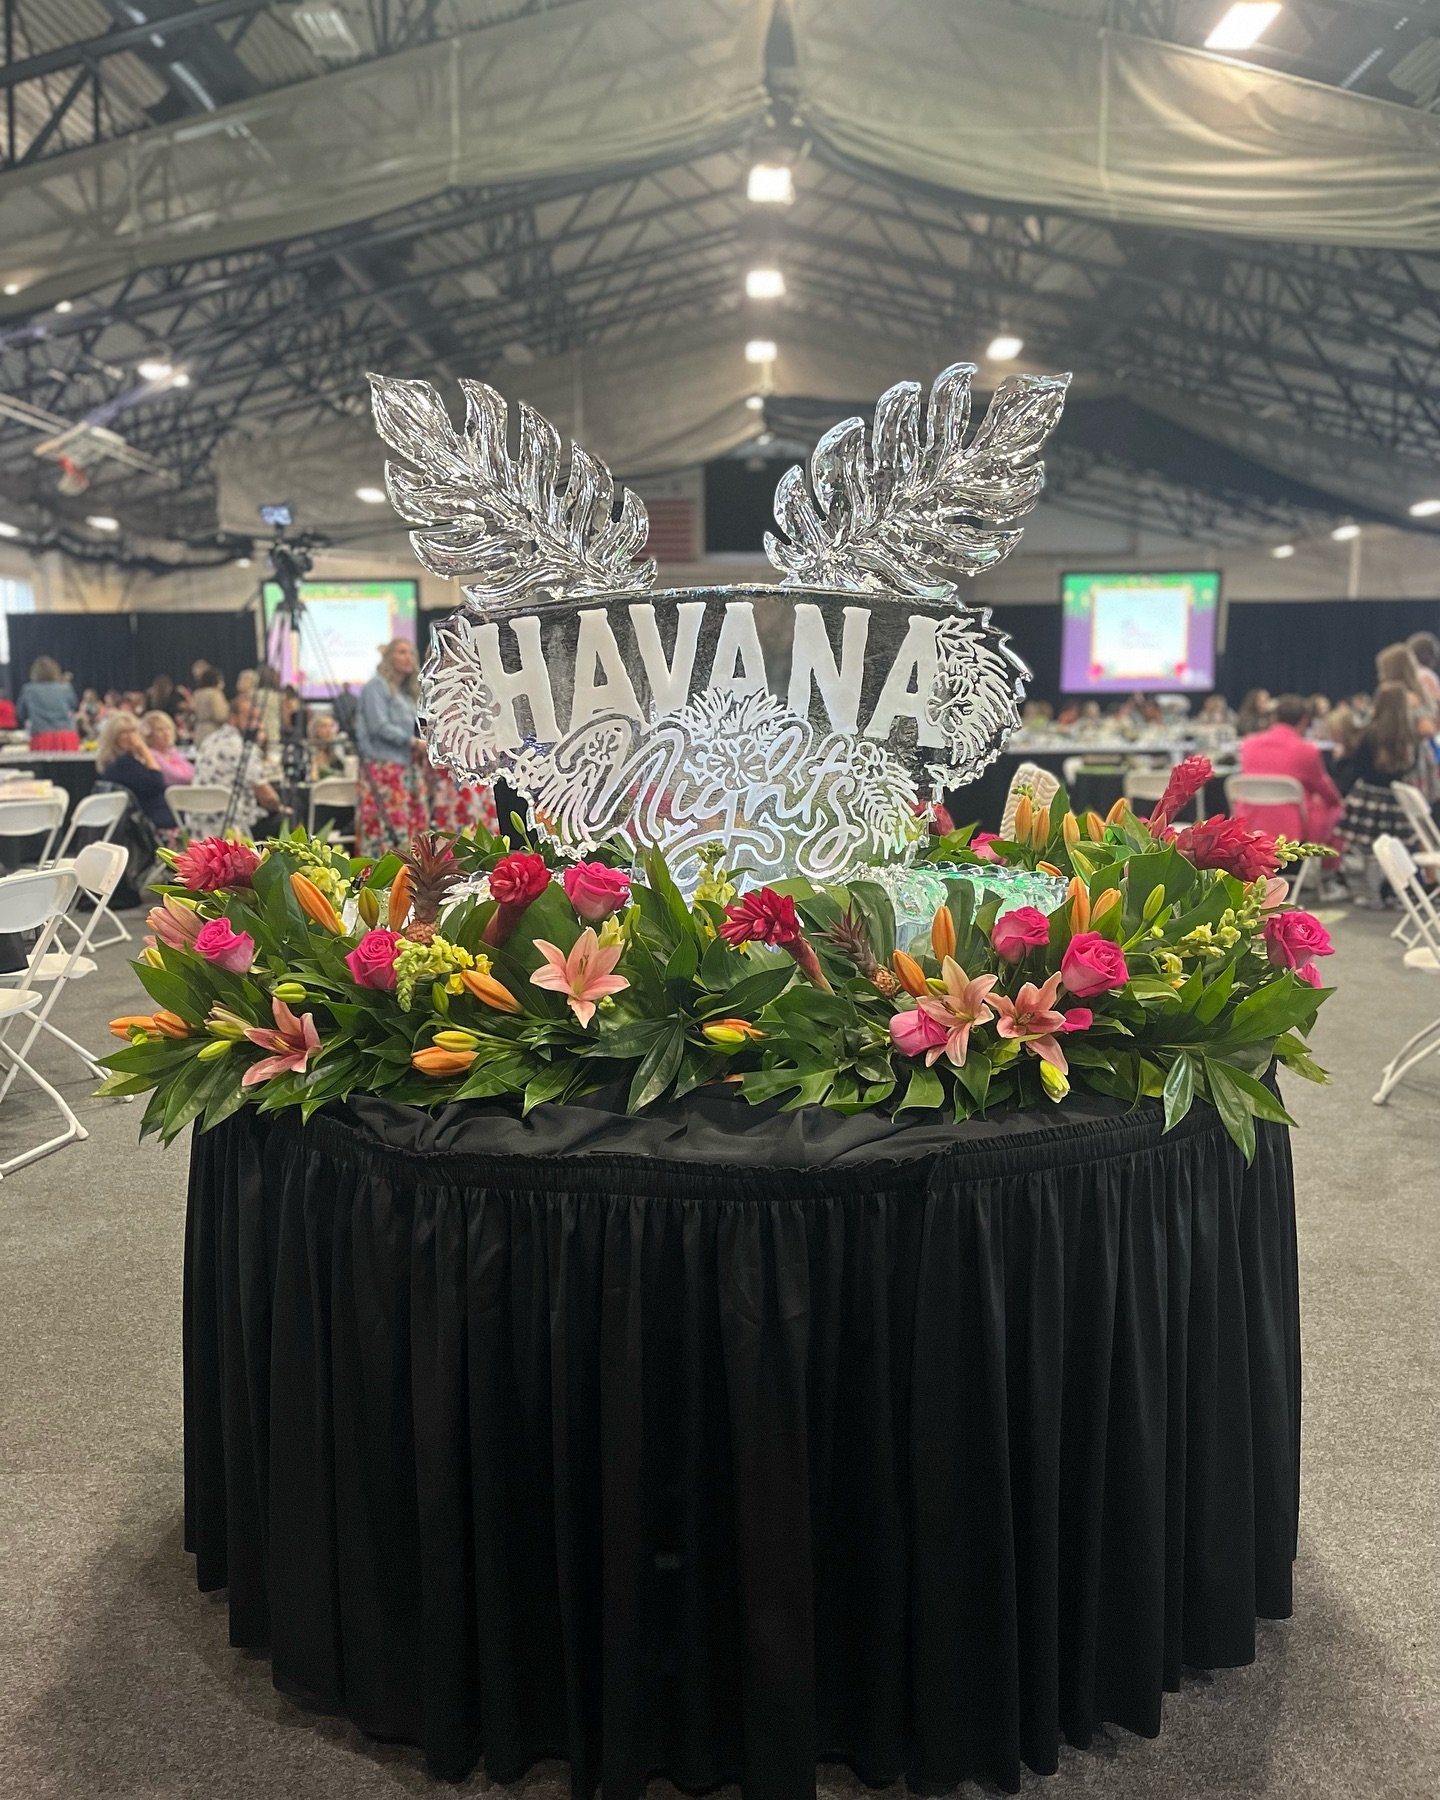 Havana Nights with Memorial Health Foundation for their 19th annual Fashion show! 🌺🌿💫 #mhsfashionshow